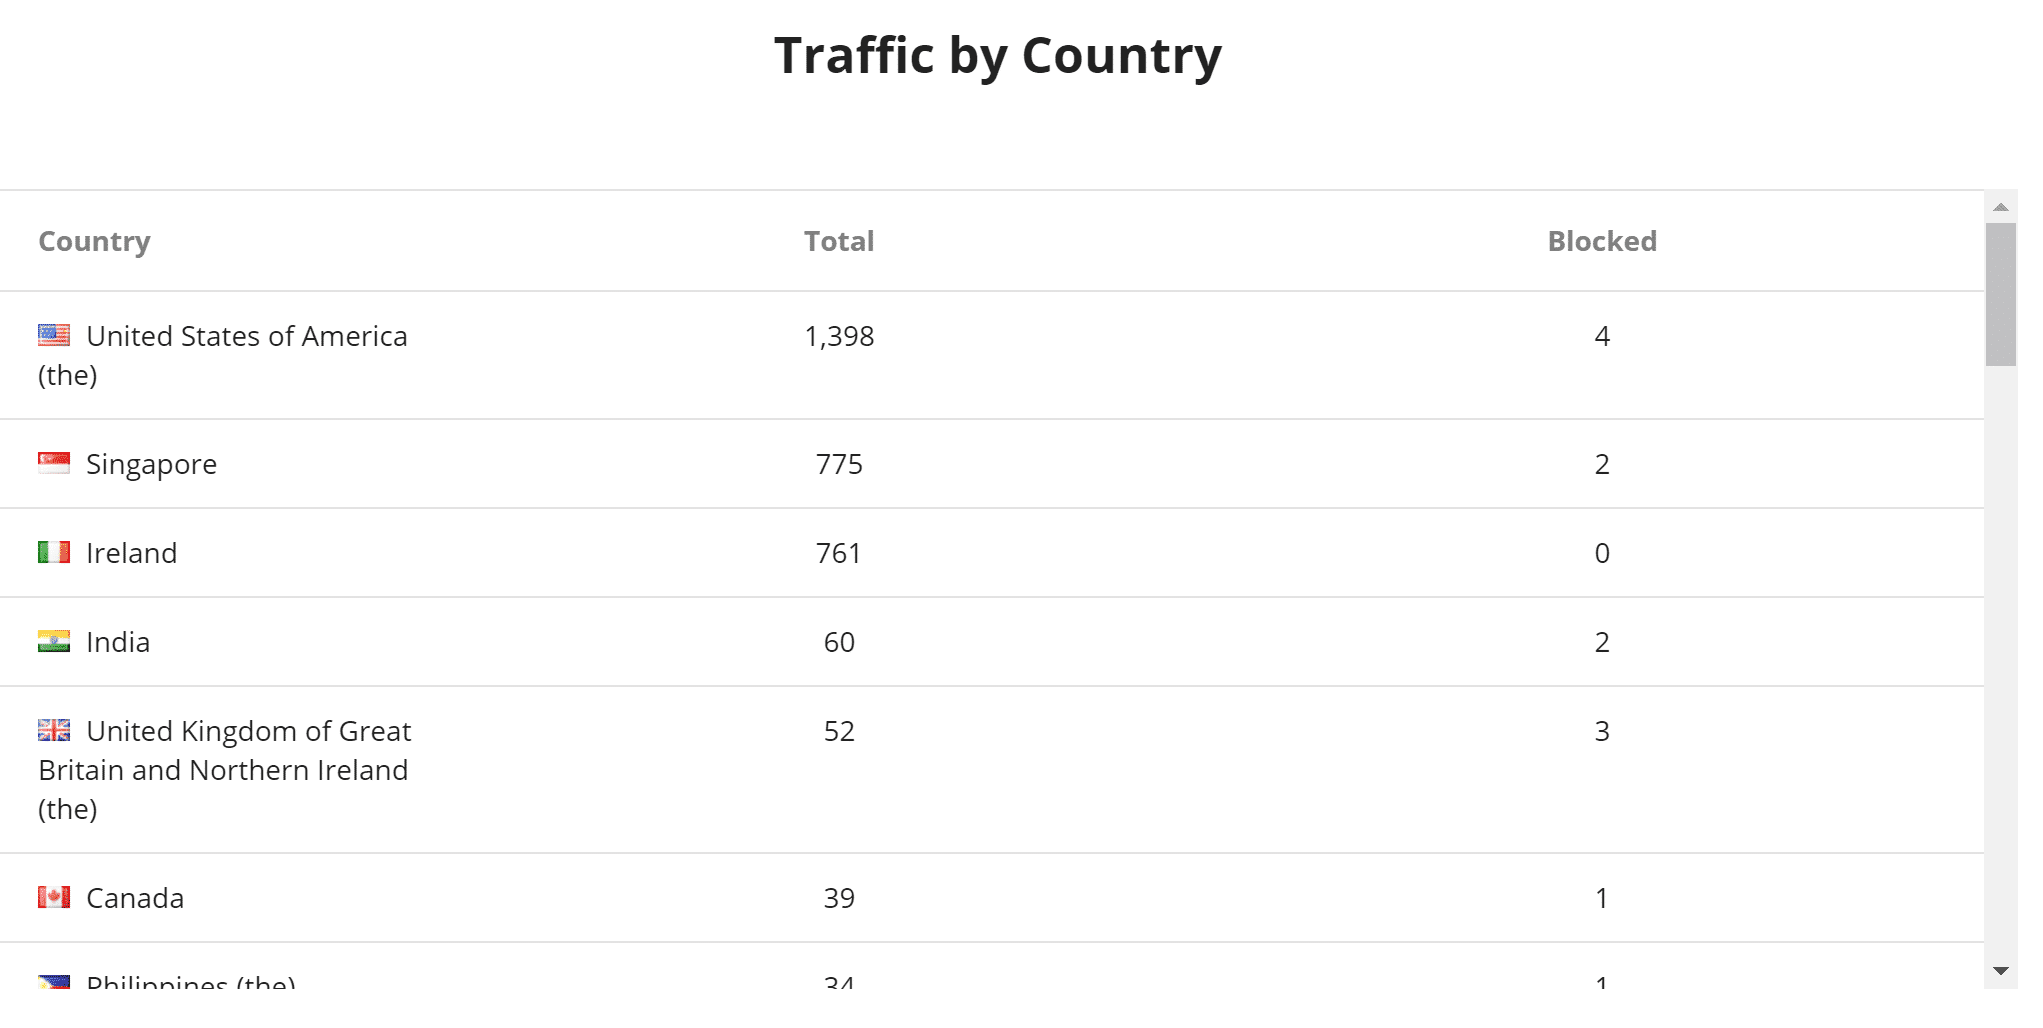 Traffic by country